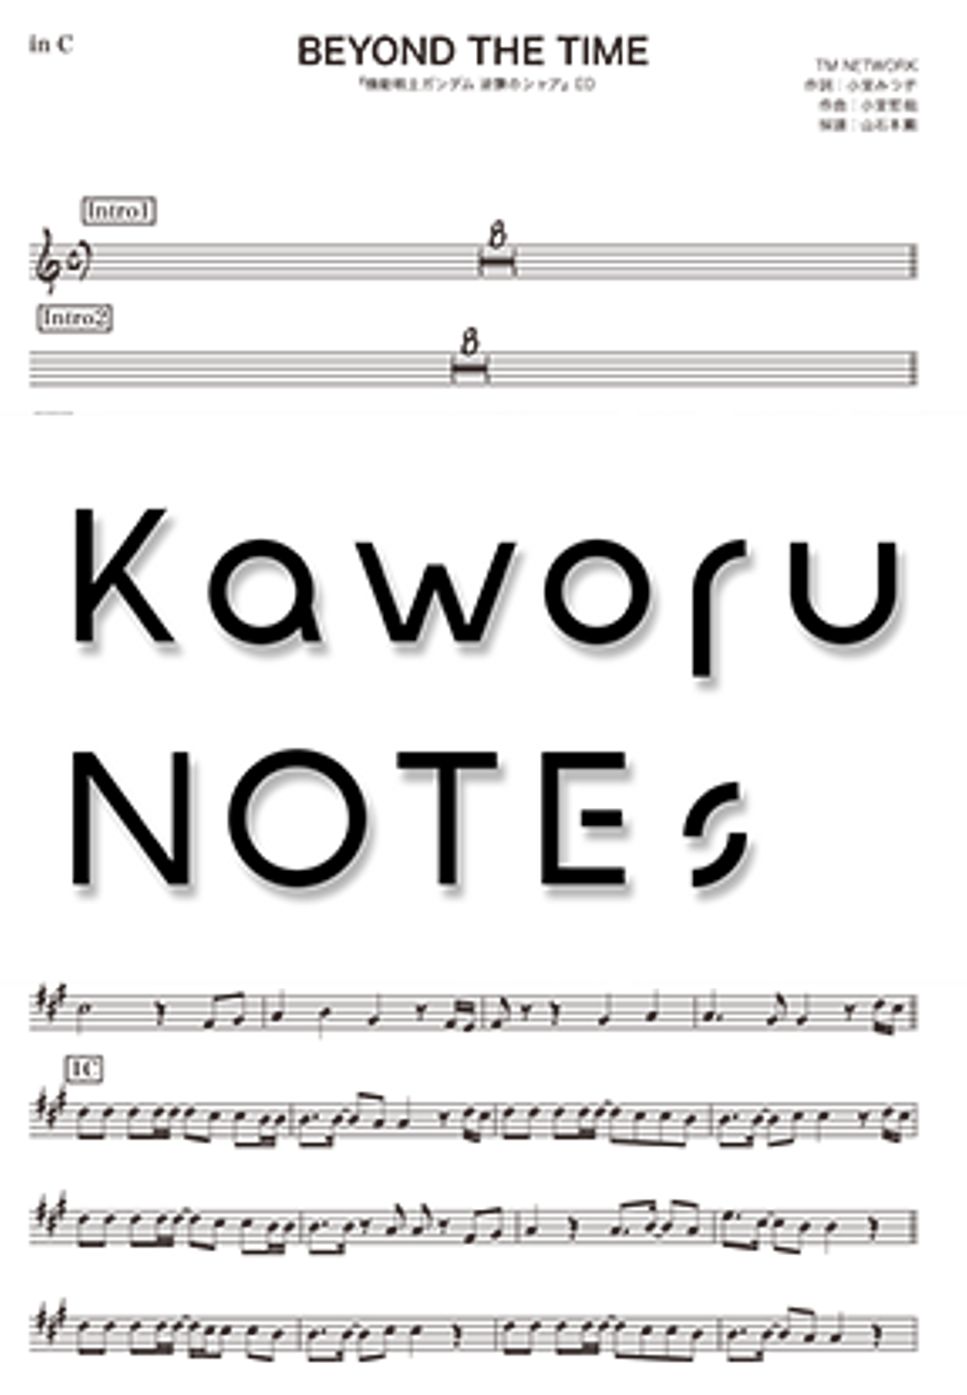 TM NETWORK - BEYOND THE TIME（bass clef/Mobile Suit Gundam Char's Counterattack） by Kaworu NOTEs